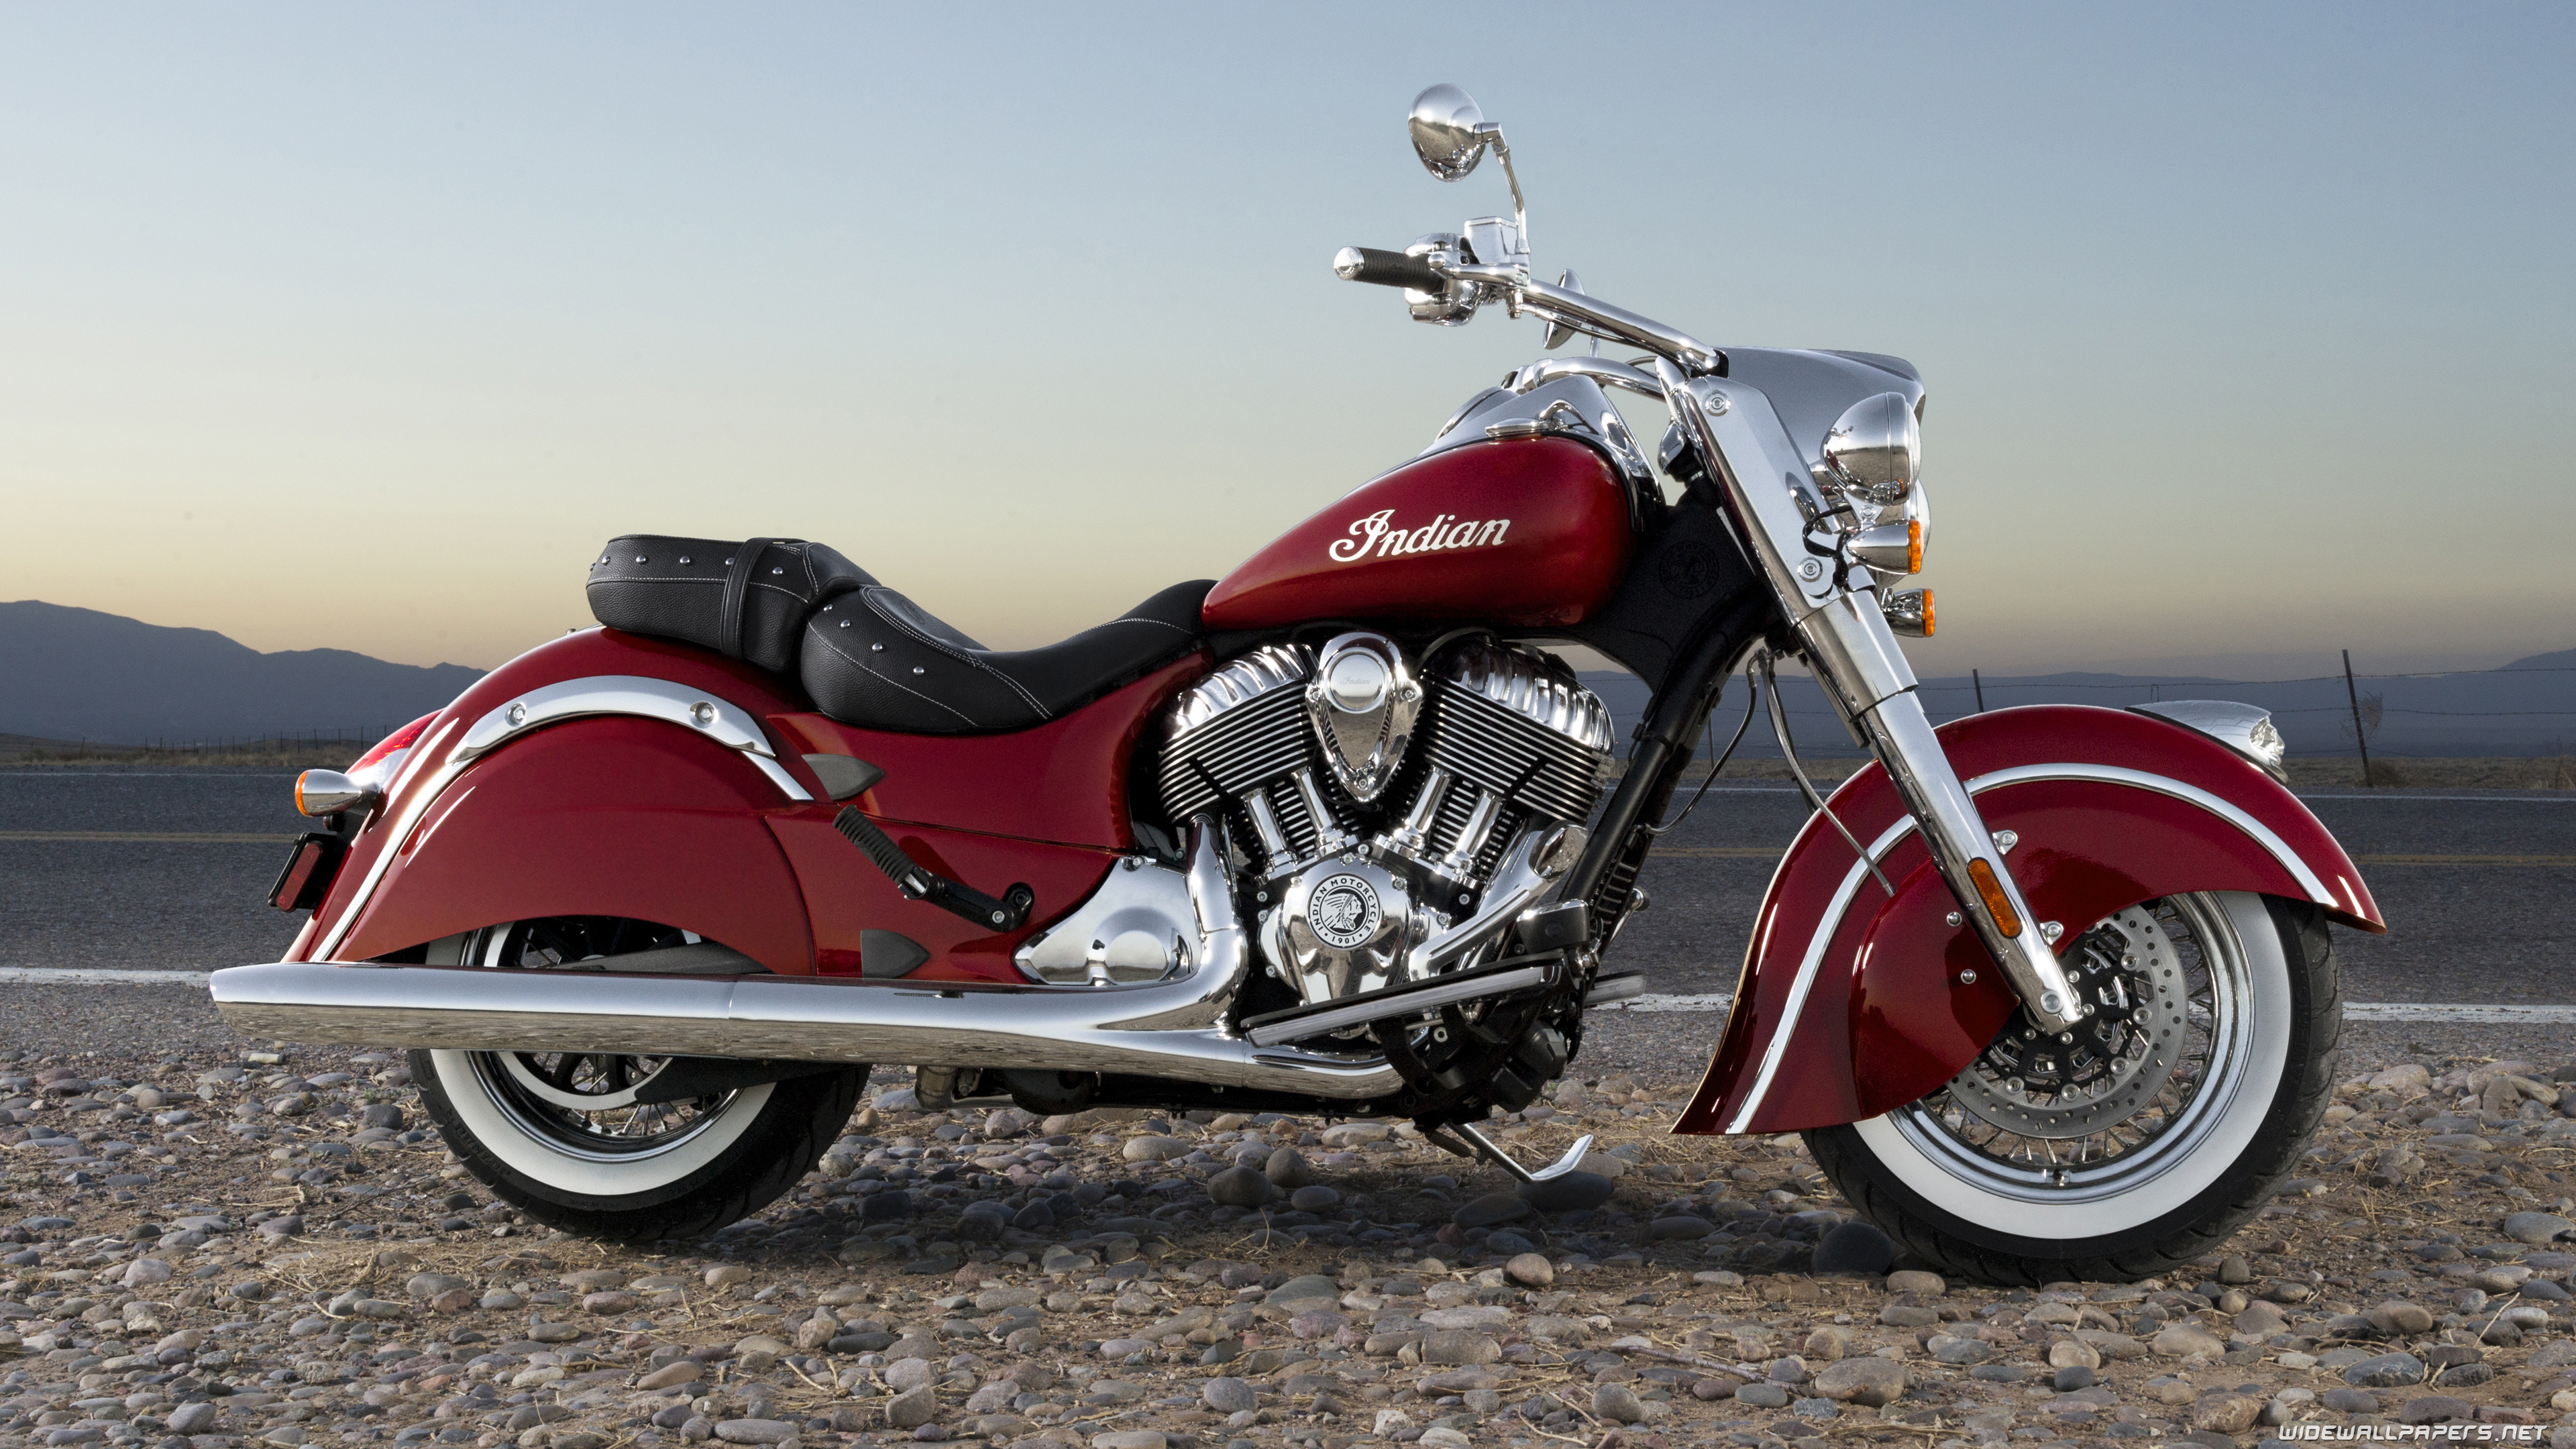 71+] Indian Motorcycle Wallpaper on